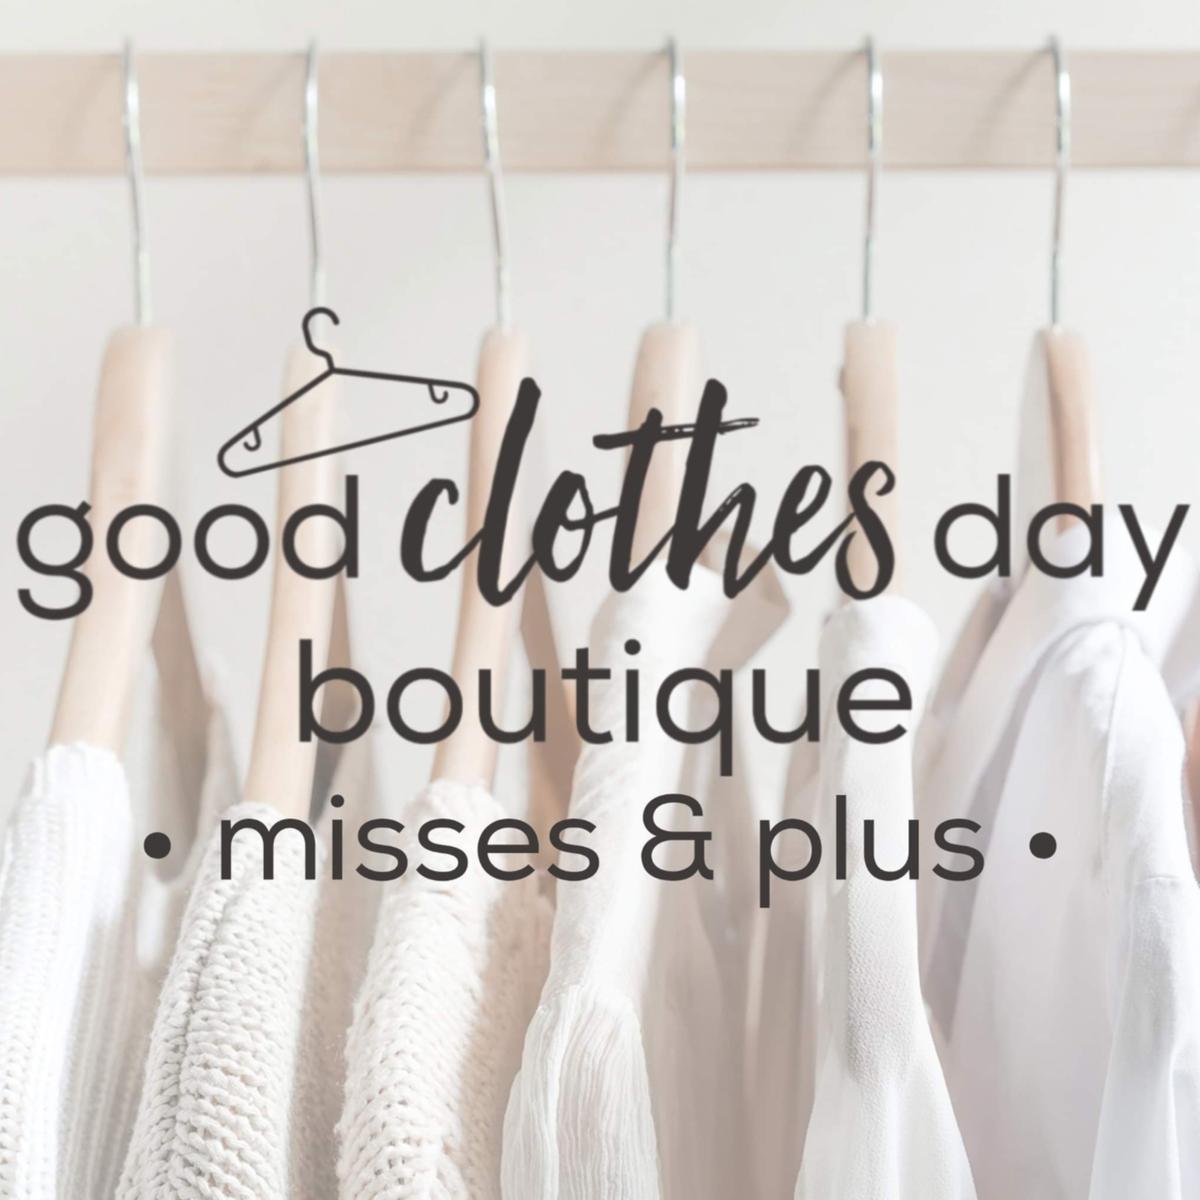 GoodClothesDay's images